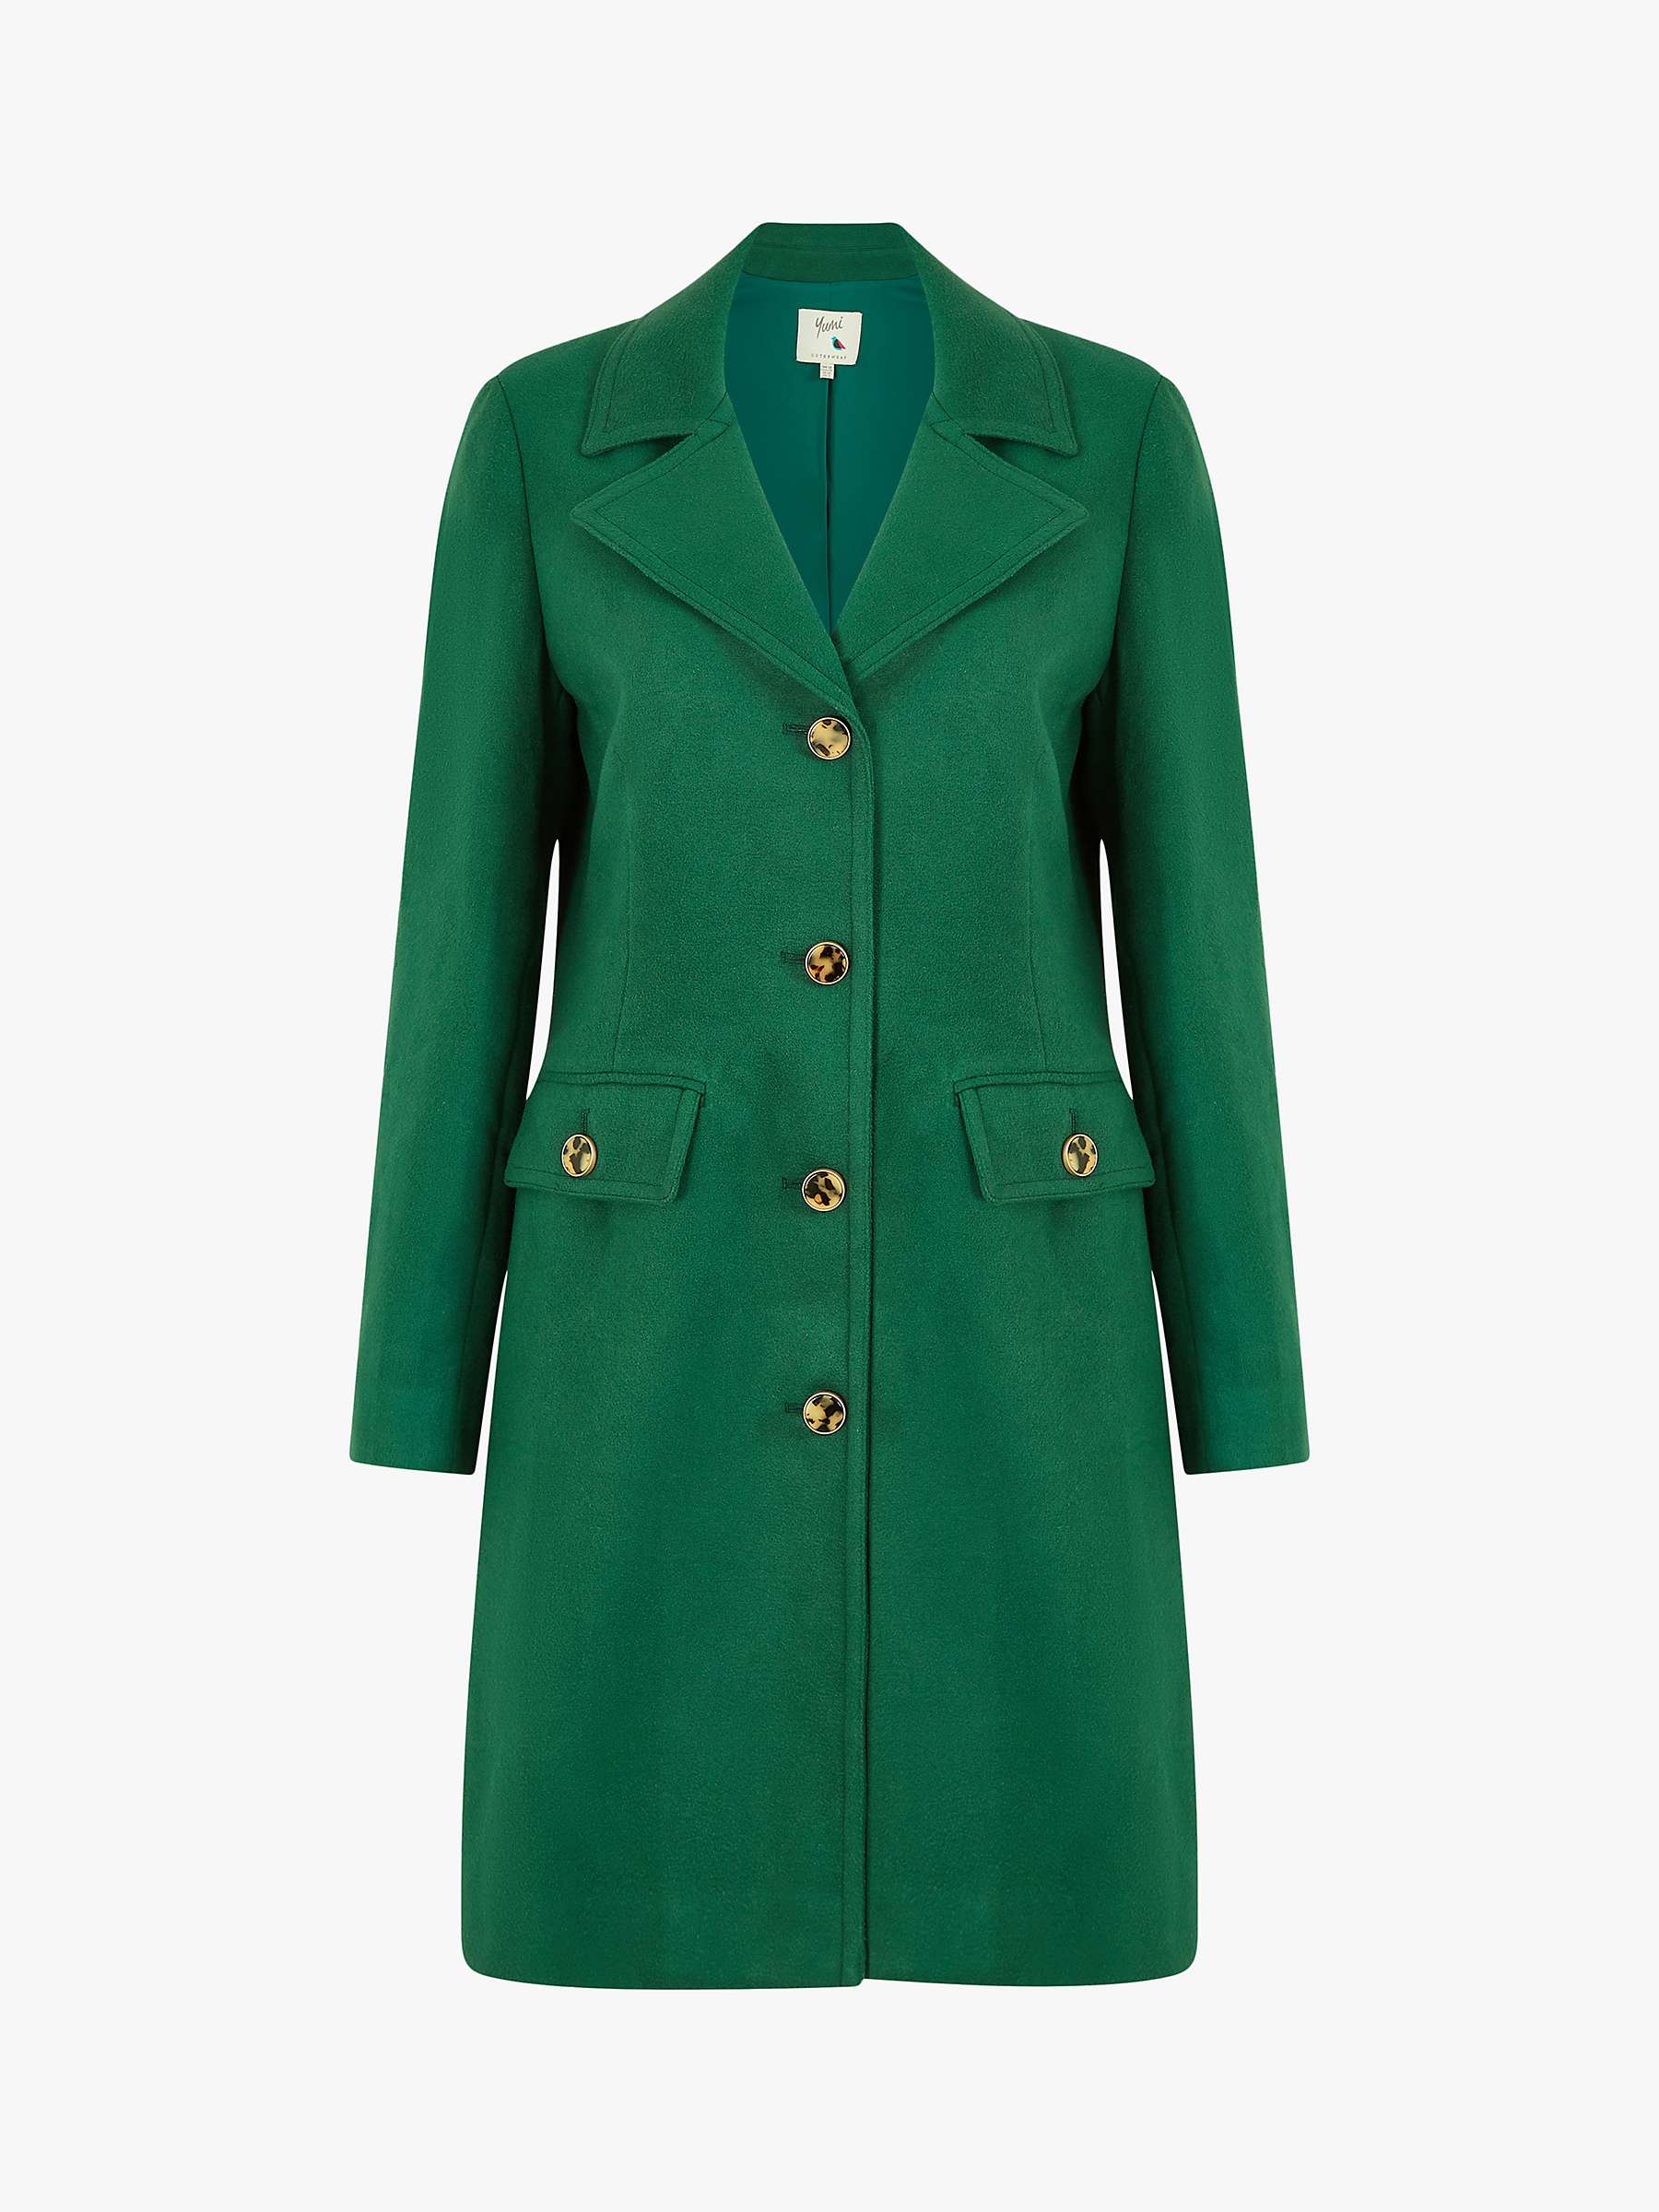 Buy Yumi Military Button Through Coat Online at johnlewis.com